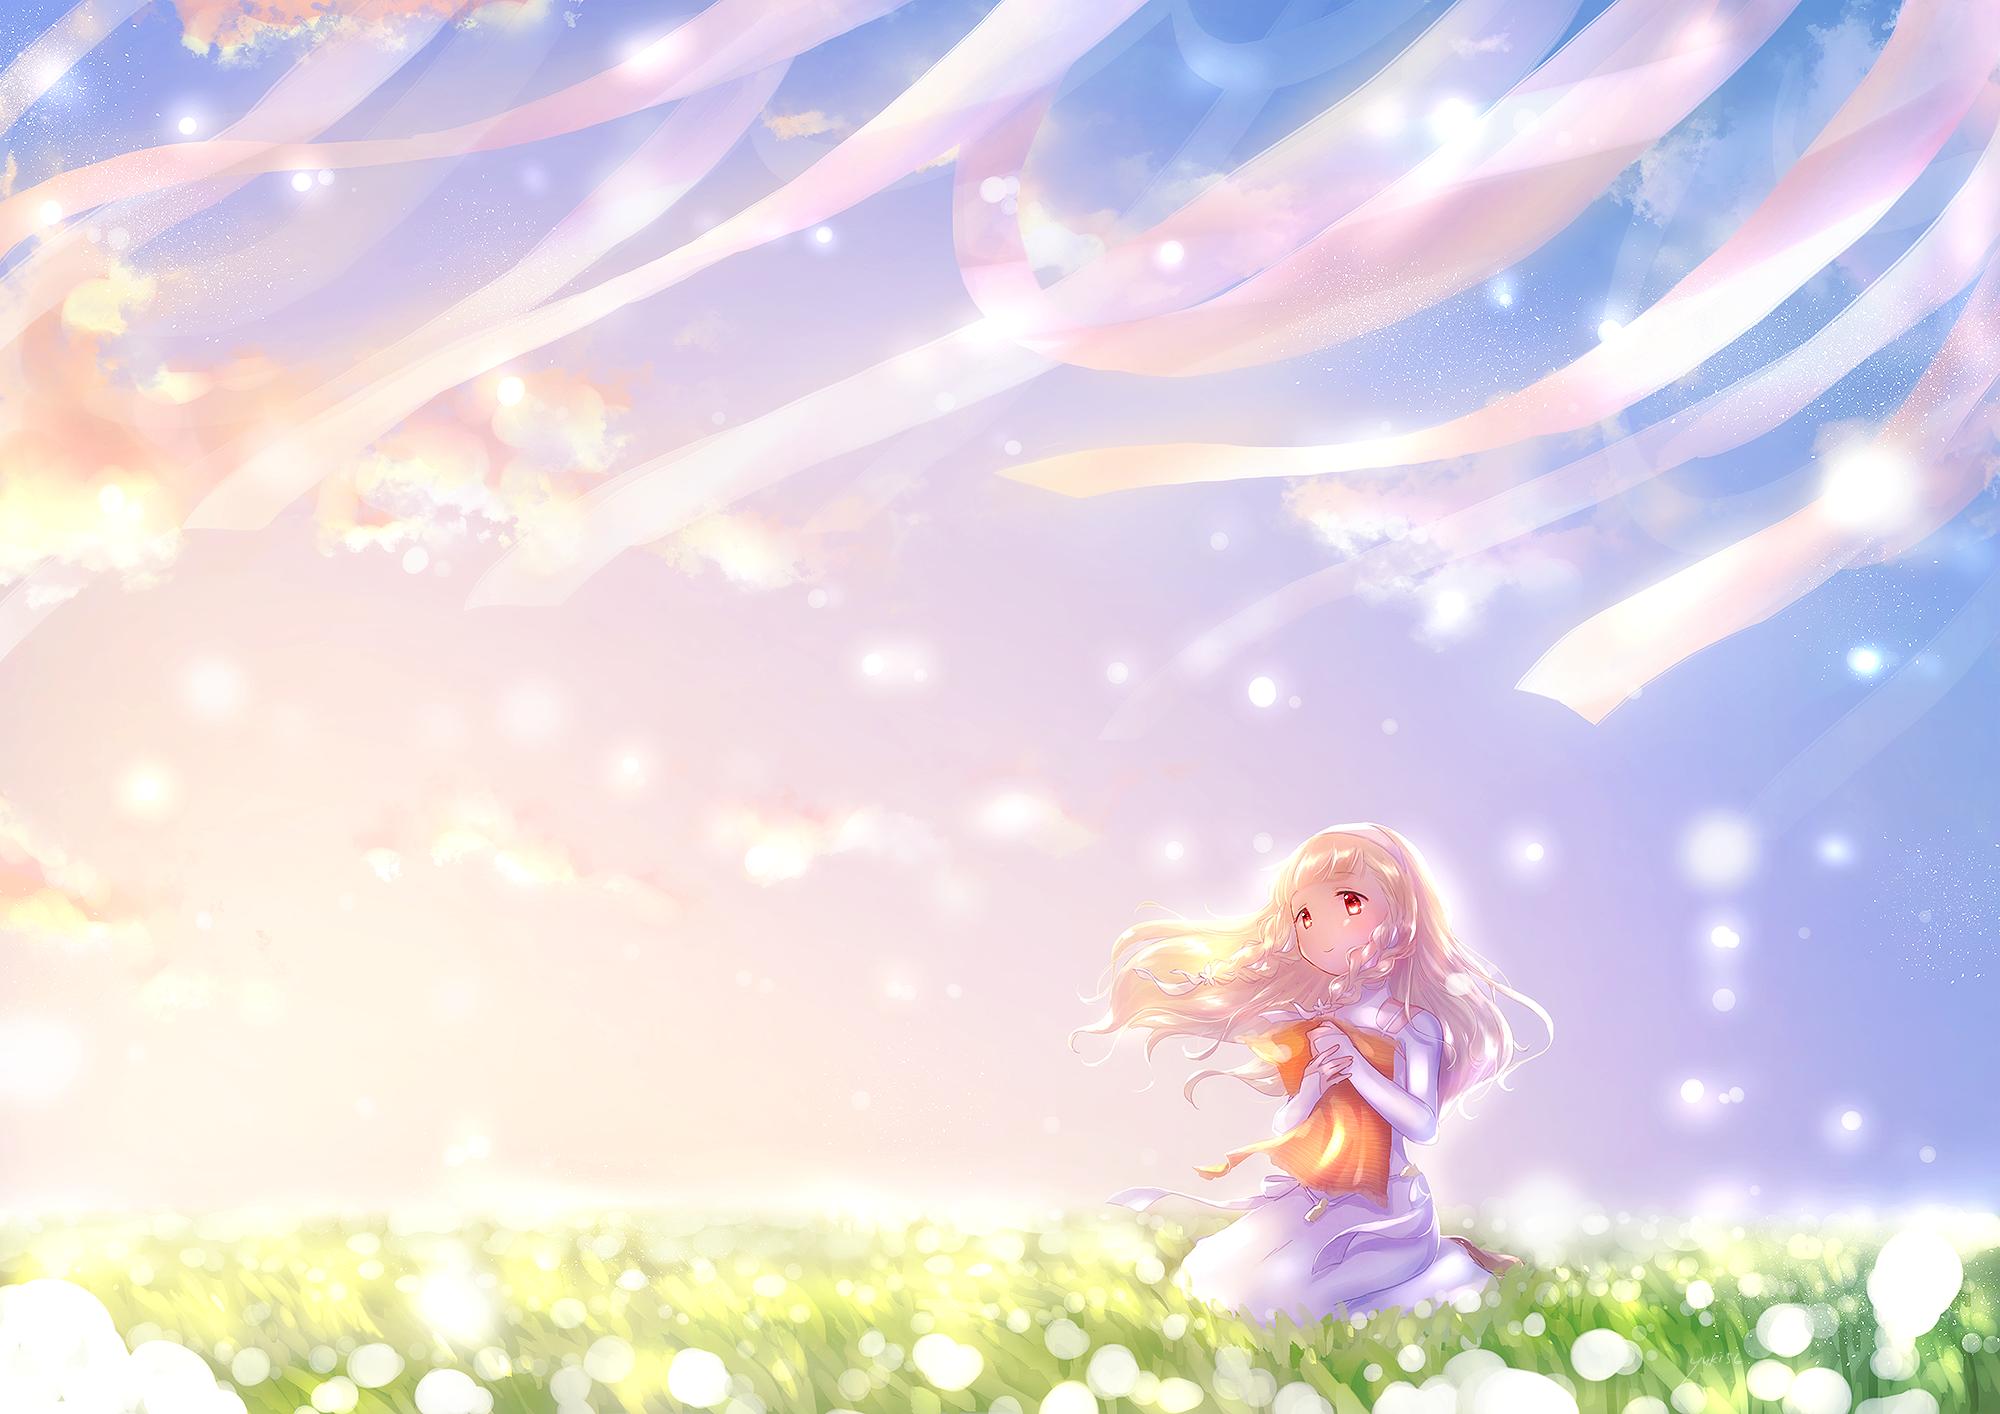 Anime Maquia: When the Promised Flower Blooms HD Wallpaper | Background Image